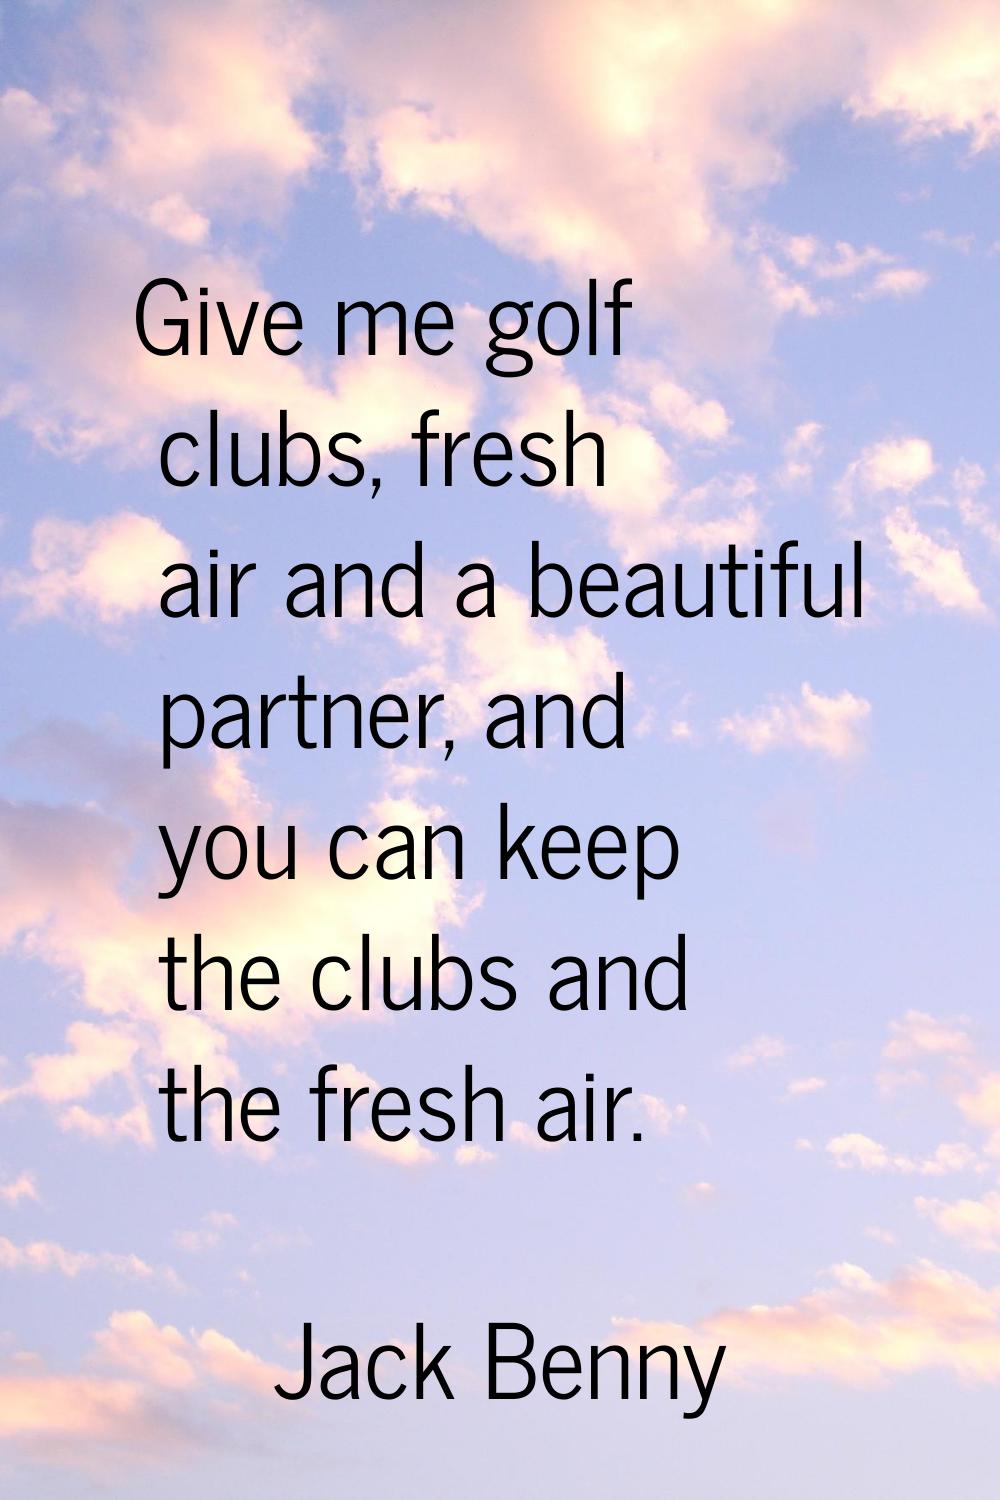 Give me golf clubs, fresh air and a beautiful partner, and you can keep the clubs and the fresh air